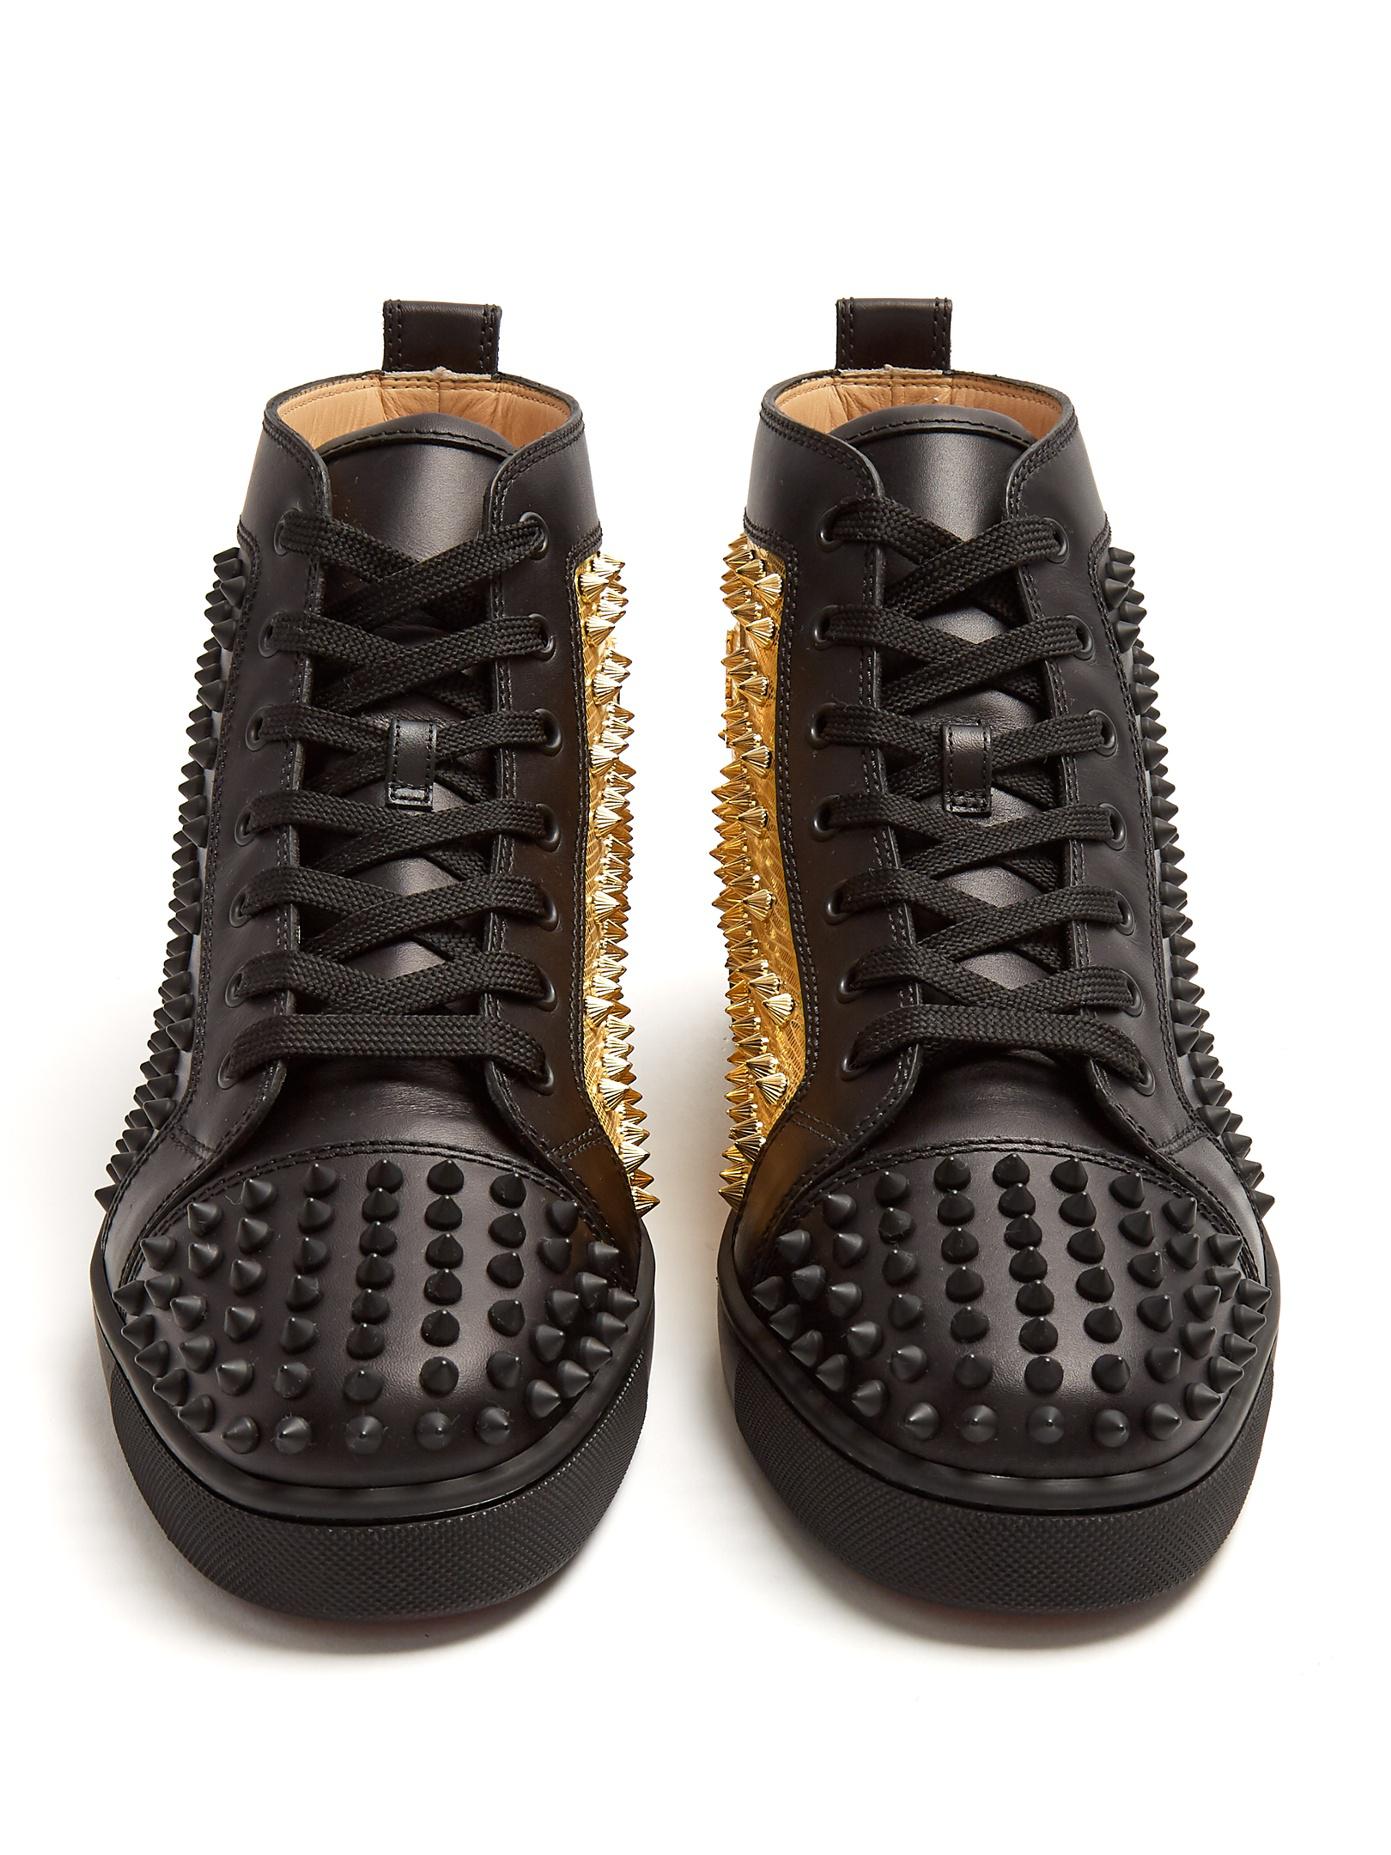 black spiked louboutin